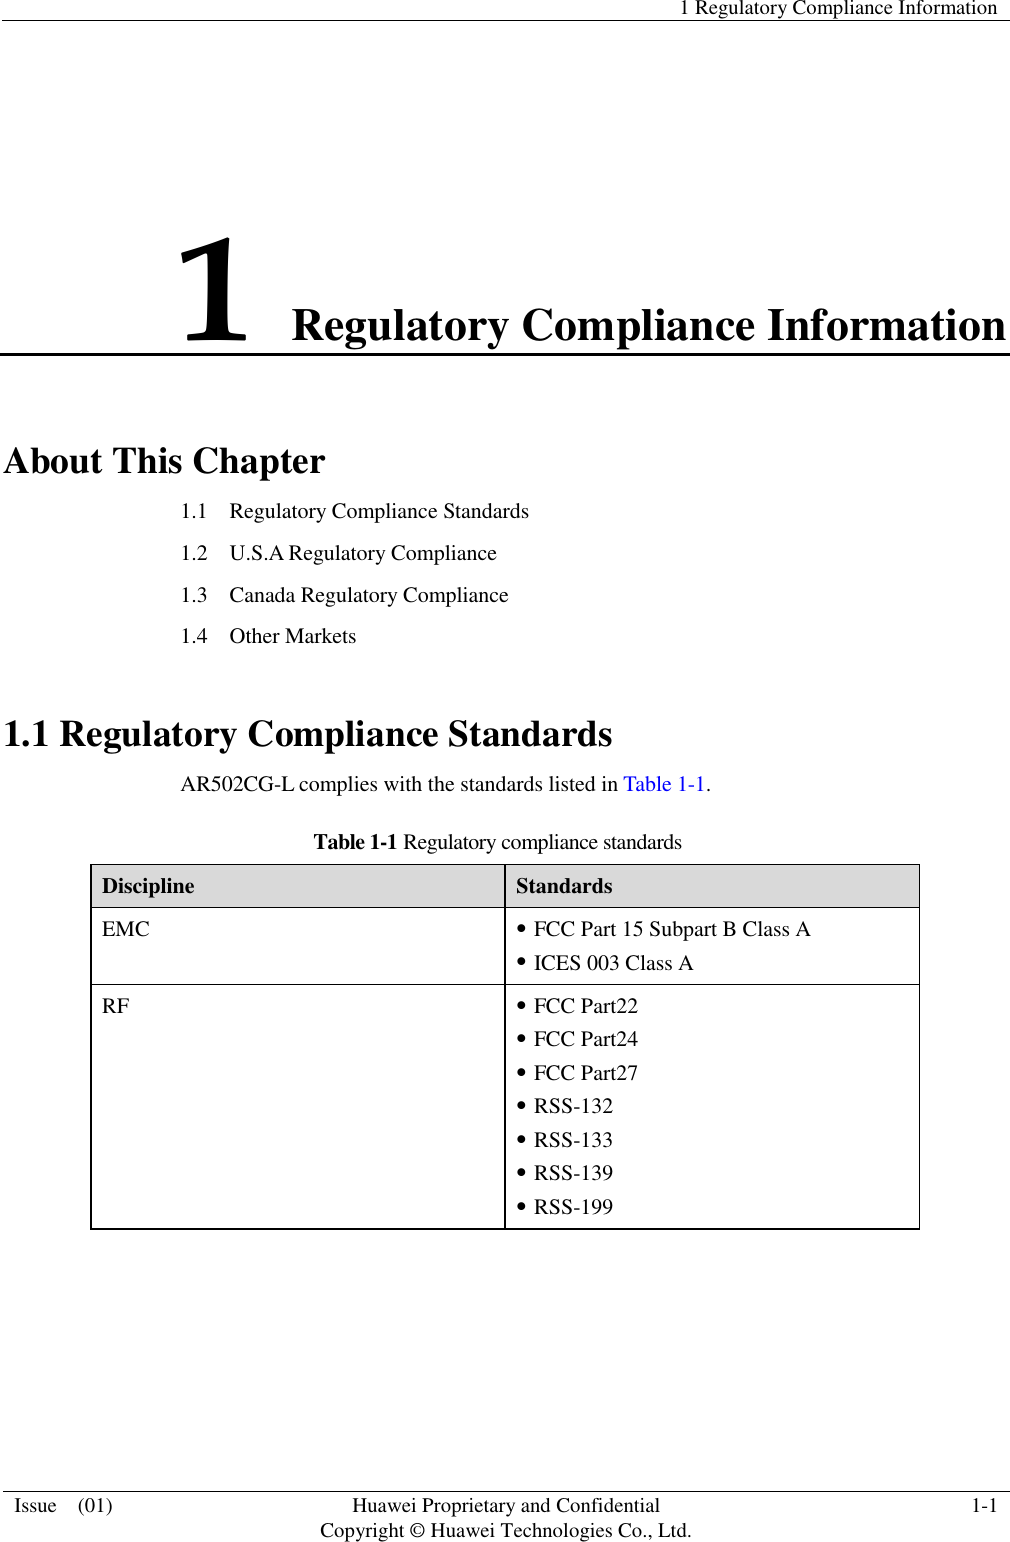   1 Regulatory Compliance Information  Issue    (01)  Huawei Proprietary and Confidential                                     Copyright © Huawei Technologies Co., Ltd.  1-1  1 Regulatory Compliance Information About This Chapter 1.1    Regulatory Compliance Standards 1.2  U.S.A Regulatory Compliance 1.3    Canada Regulatory Compliance 1.4  Other Markets 1.1 Regulatory Compliance Standards AR502CG-L complies with the standards listed in Table 1-1. Table 1-1 Regulatory compliance standards Discipline  Standards EMC   FCC Part 15 Subpart B Class A  ICES 003 Class A RF  FCC Part22  FCC Part24  FCC Part27  RSS-132  RSS-133  RSS-139  RSS-199 